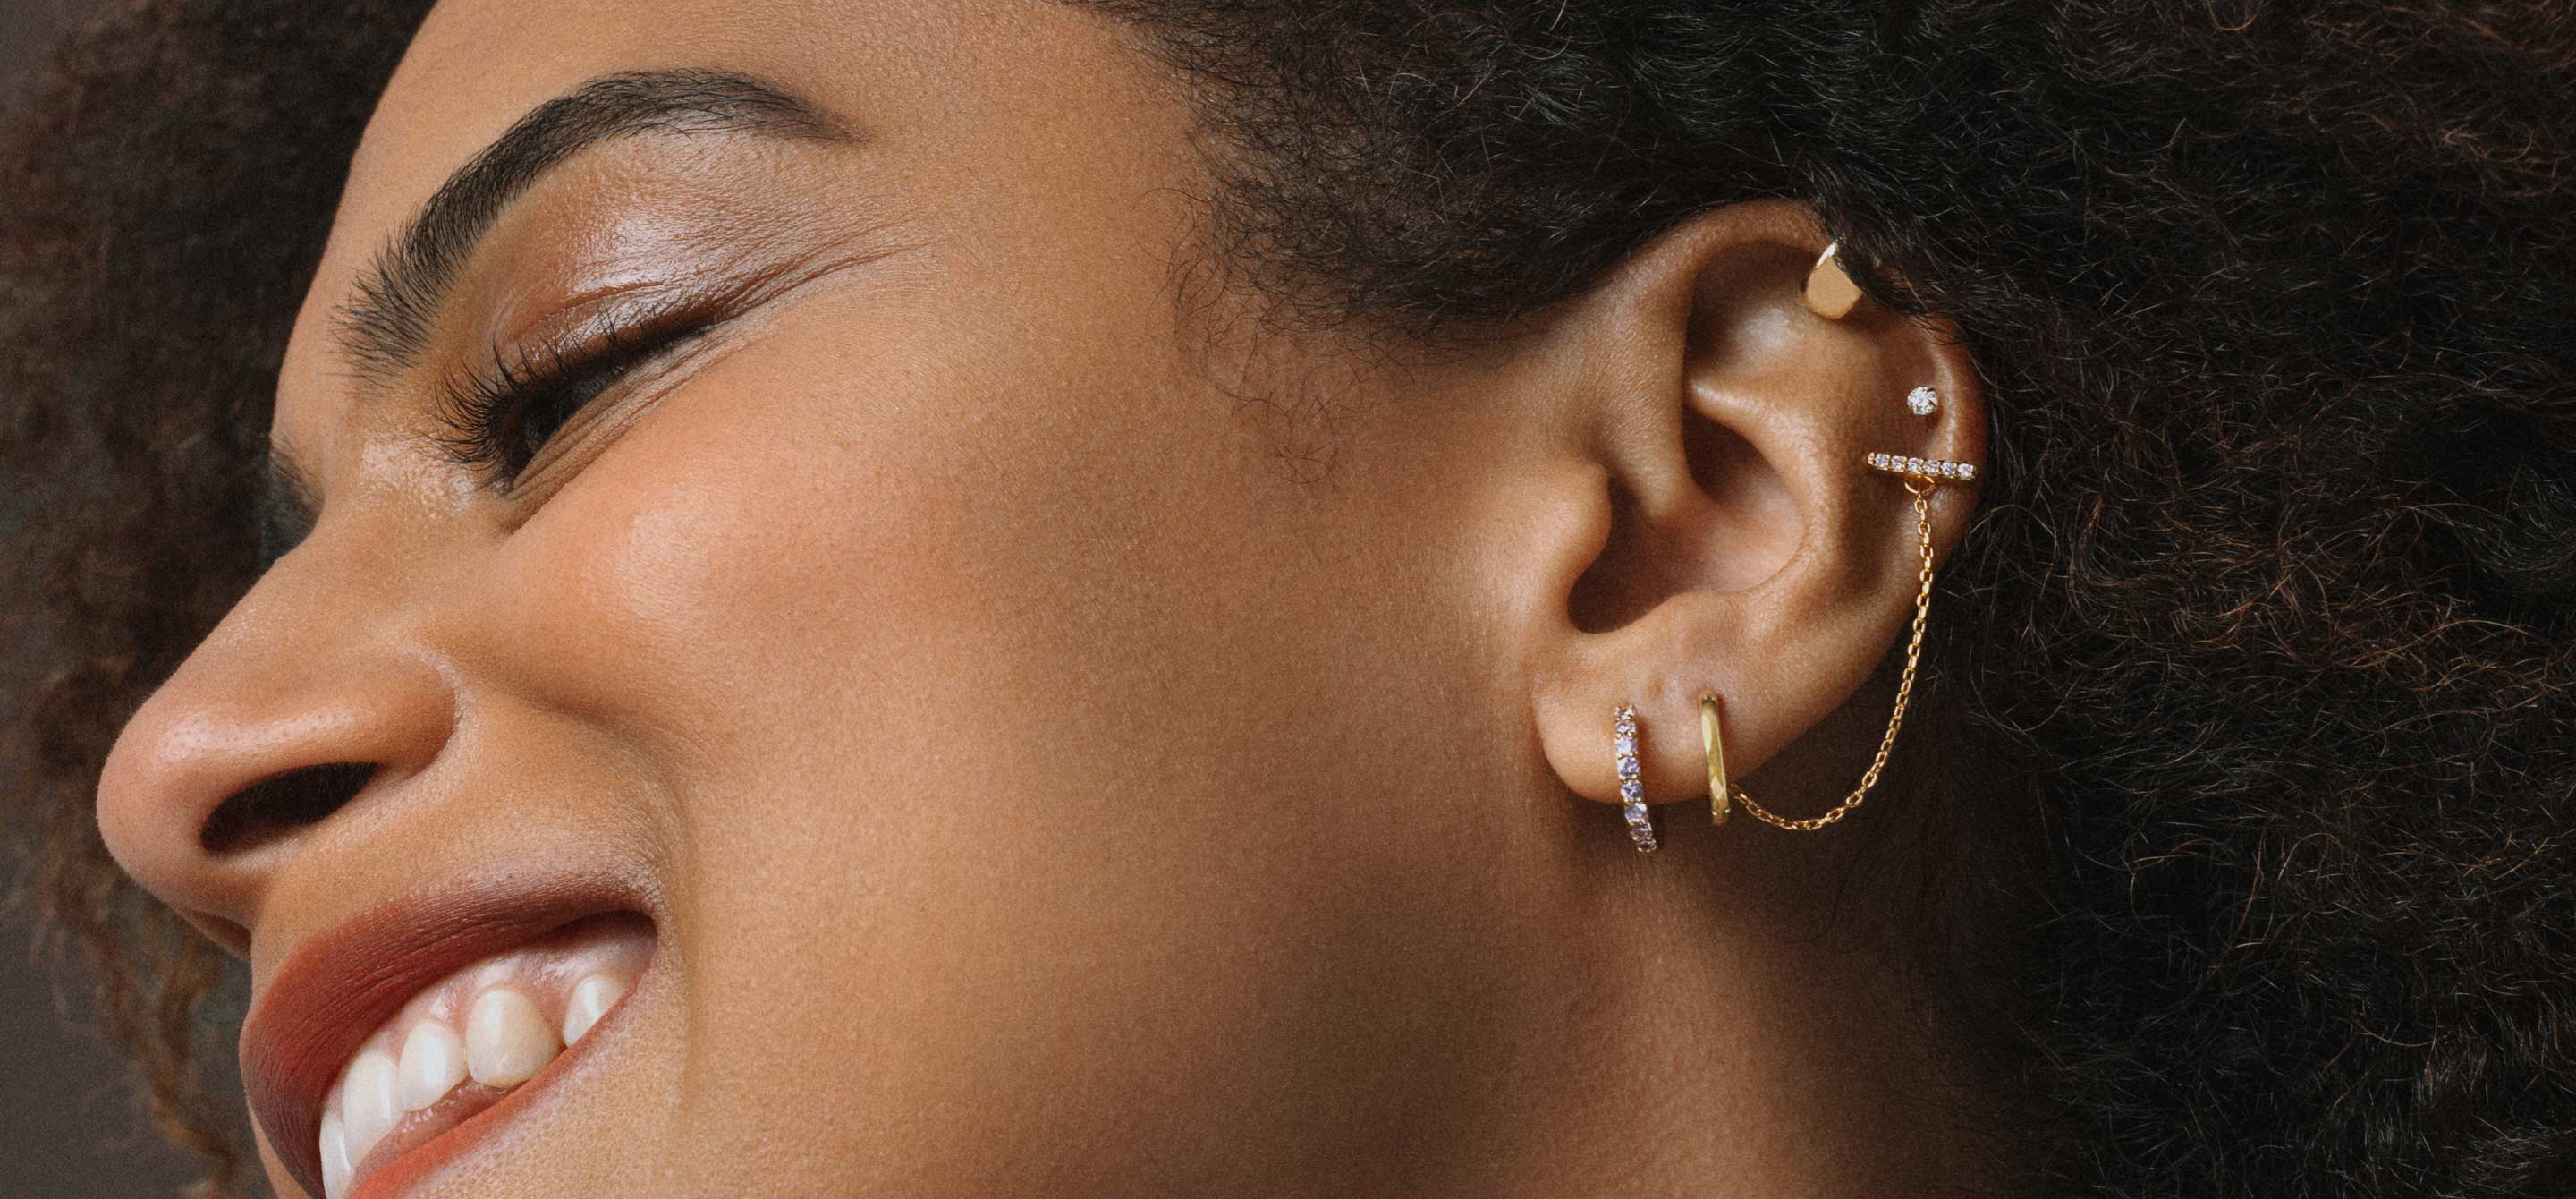 Earrings: The Enduring Allure of Adornment